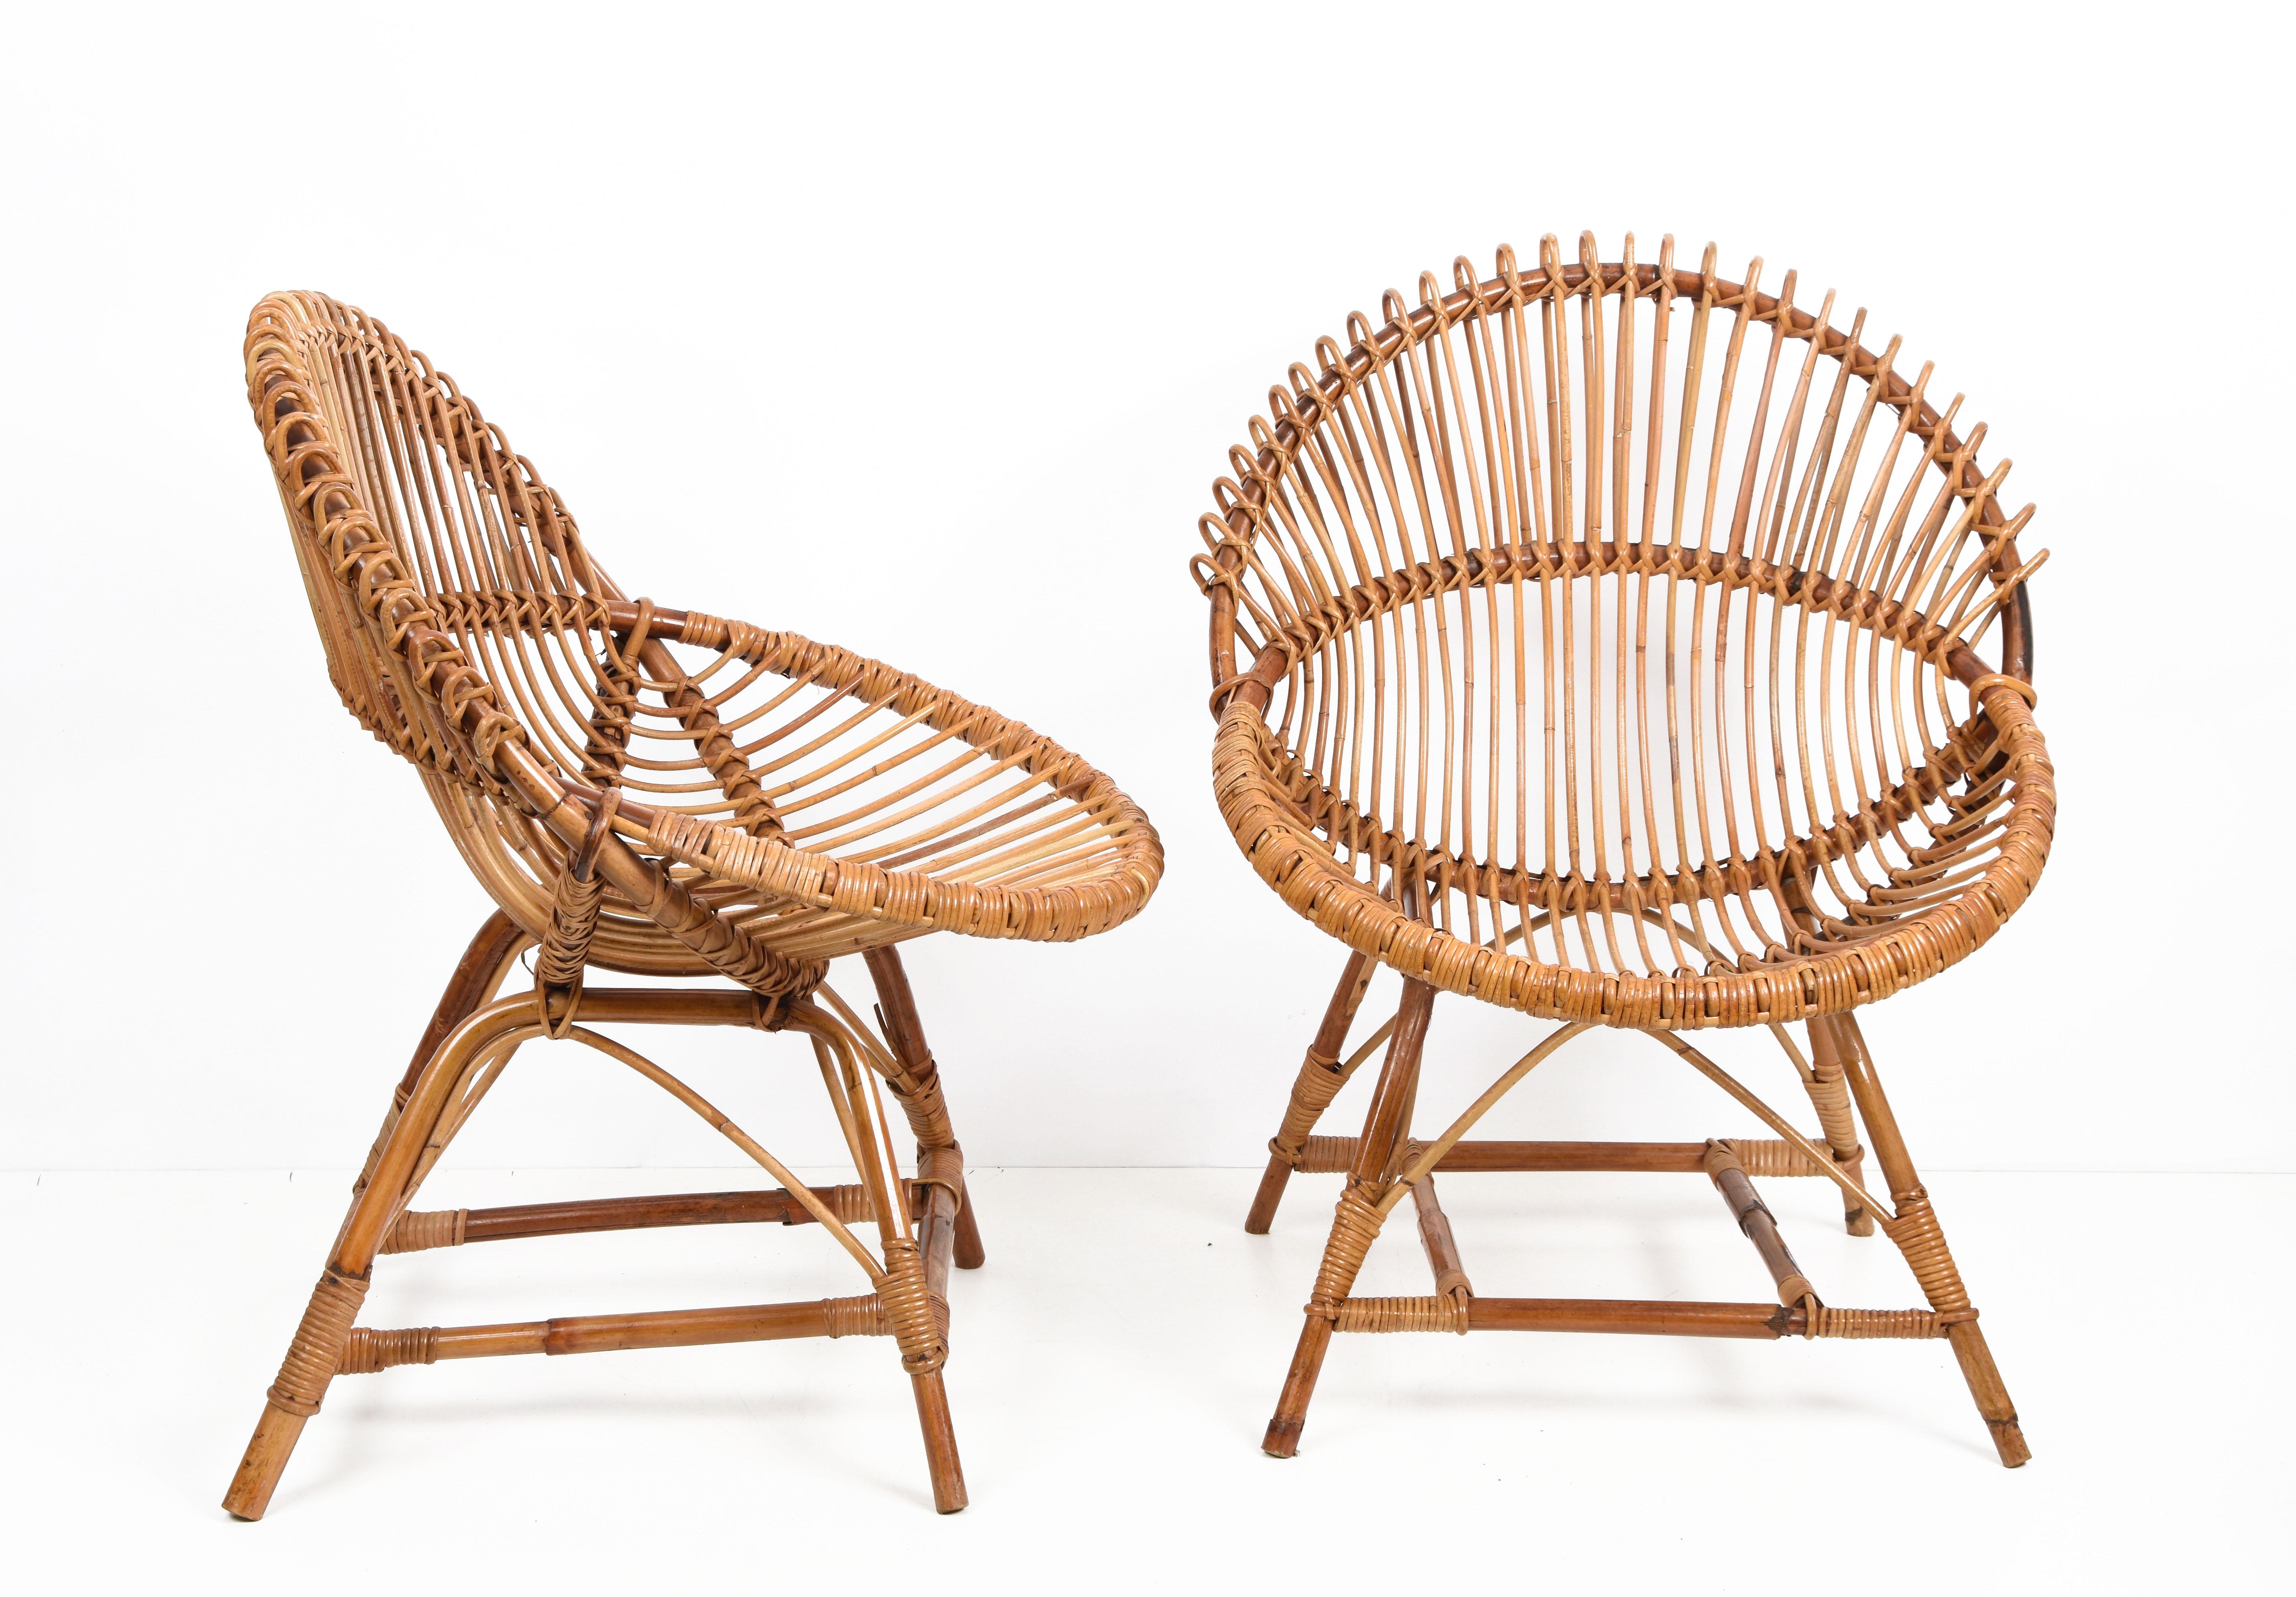 Amazing pair of midcentury rattan shell-shaped armchairs. These pieces were produced in Italy during 1950s and are attributed to Franco Albini.

The uniqueness of this set is due to the solid, shell shape of the rattan seat. A sensational mix that